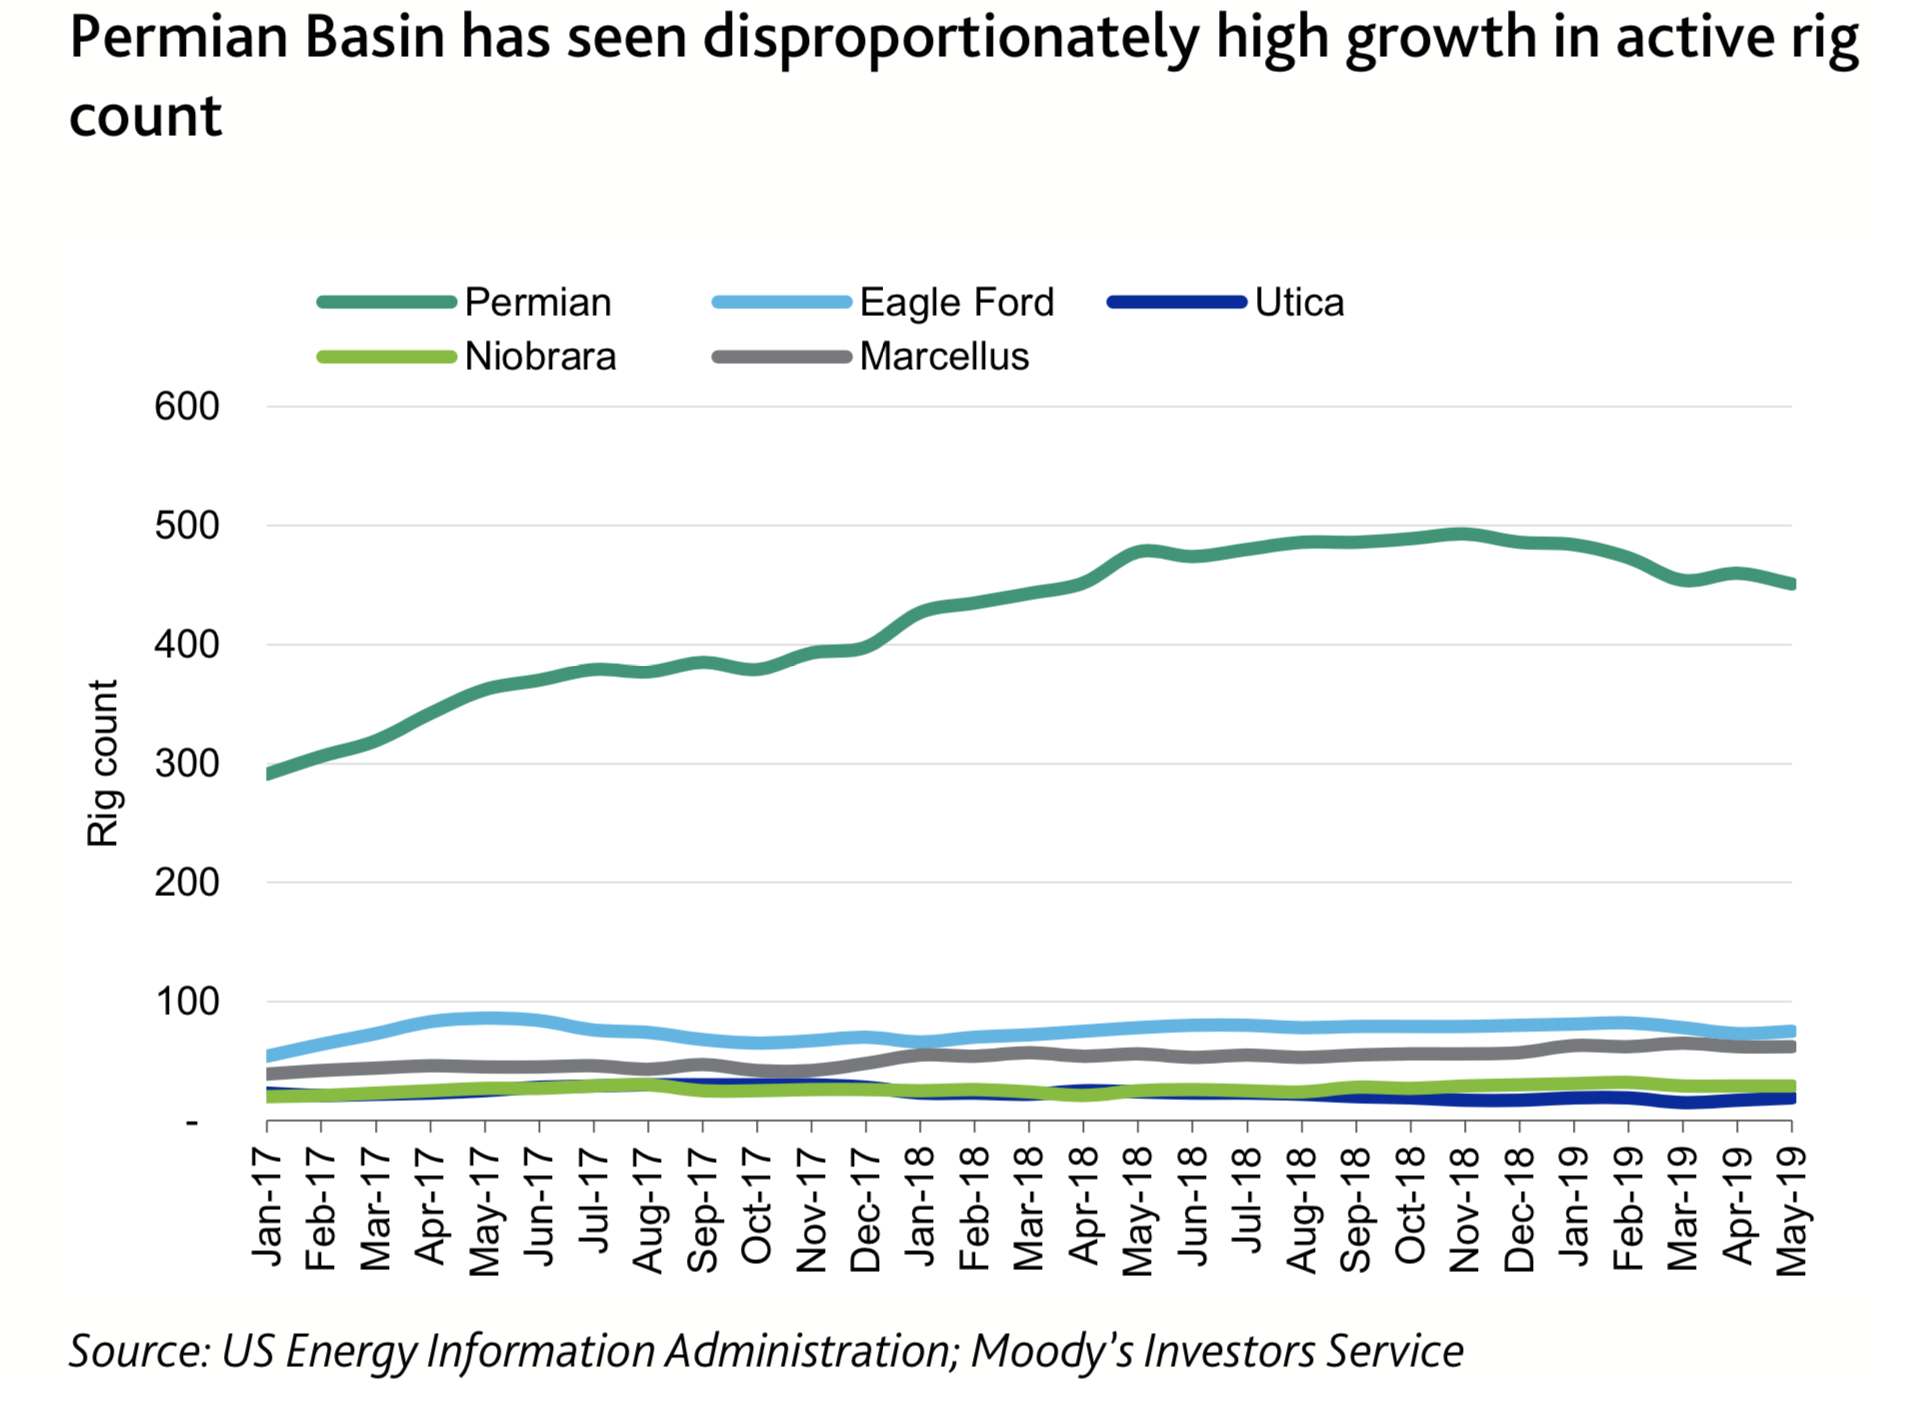 Permian Basin has seen disproportionately high growth in active rig count (Source: U.S. Energy Information Administration; Moody’s Investors Service)